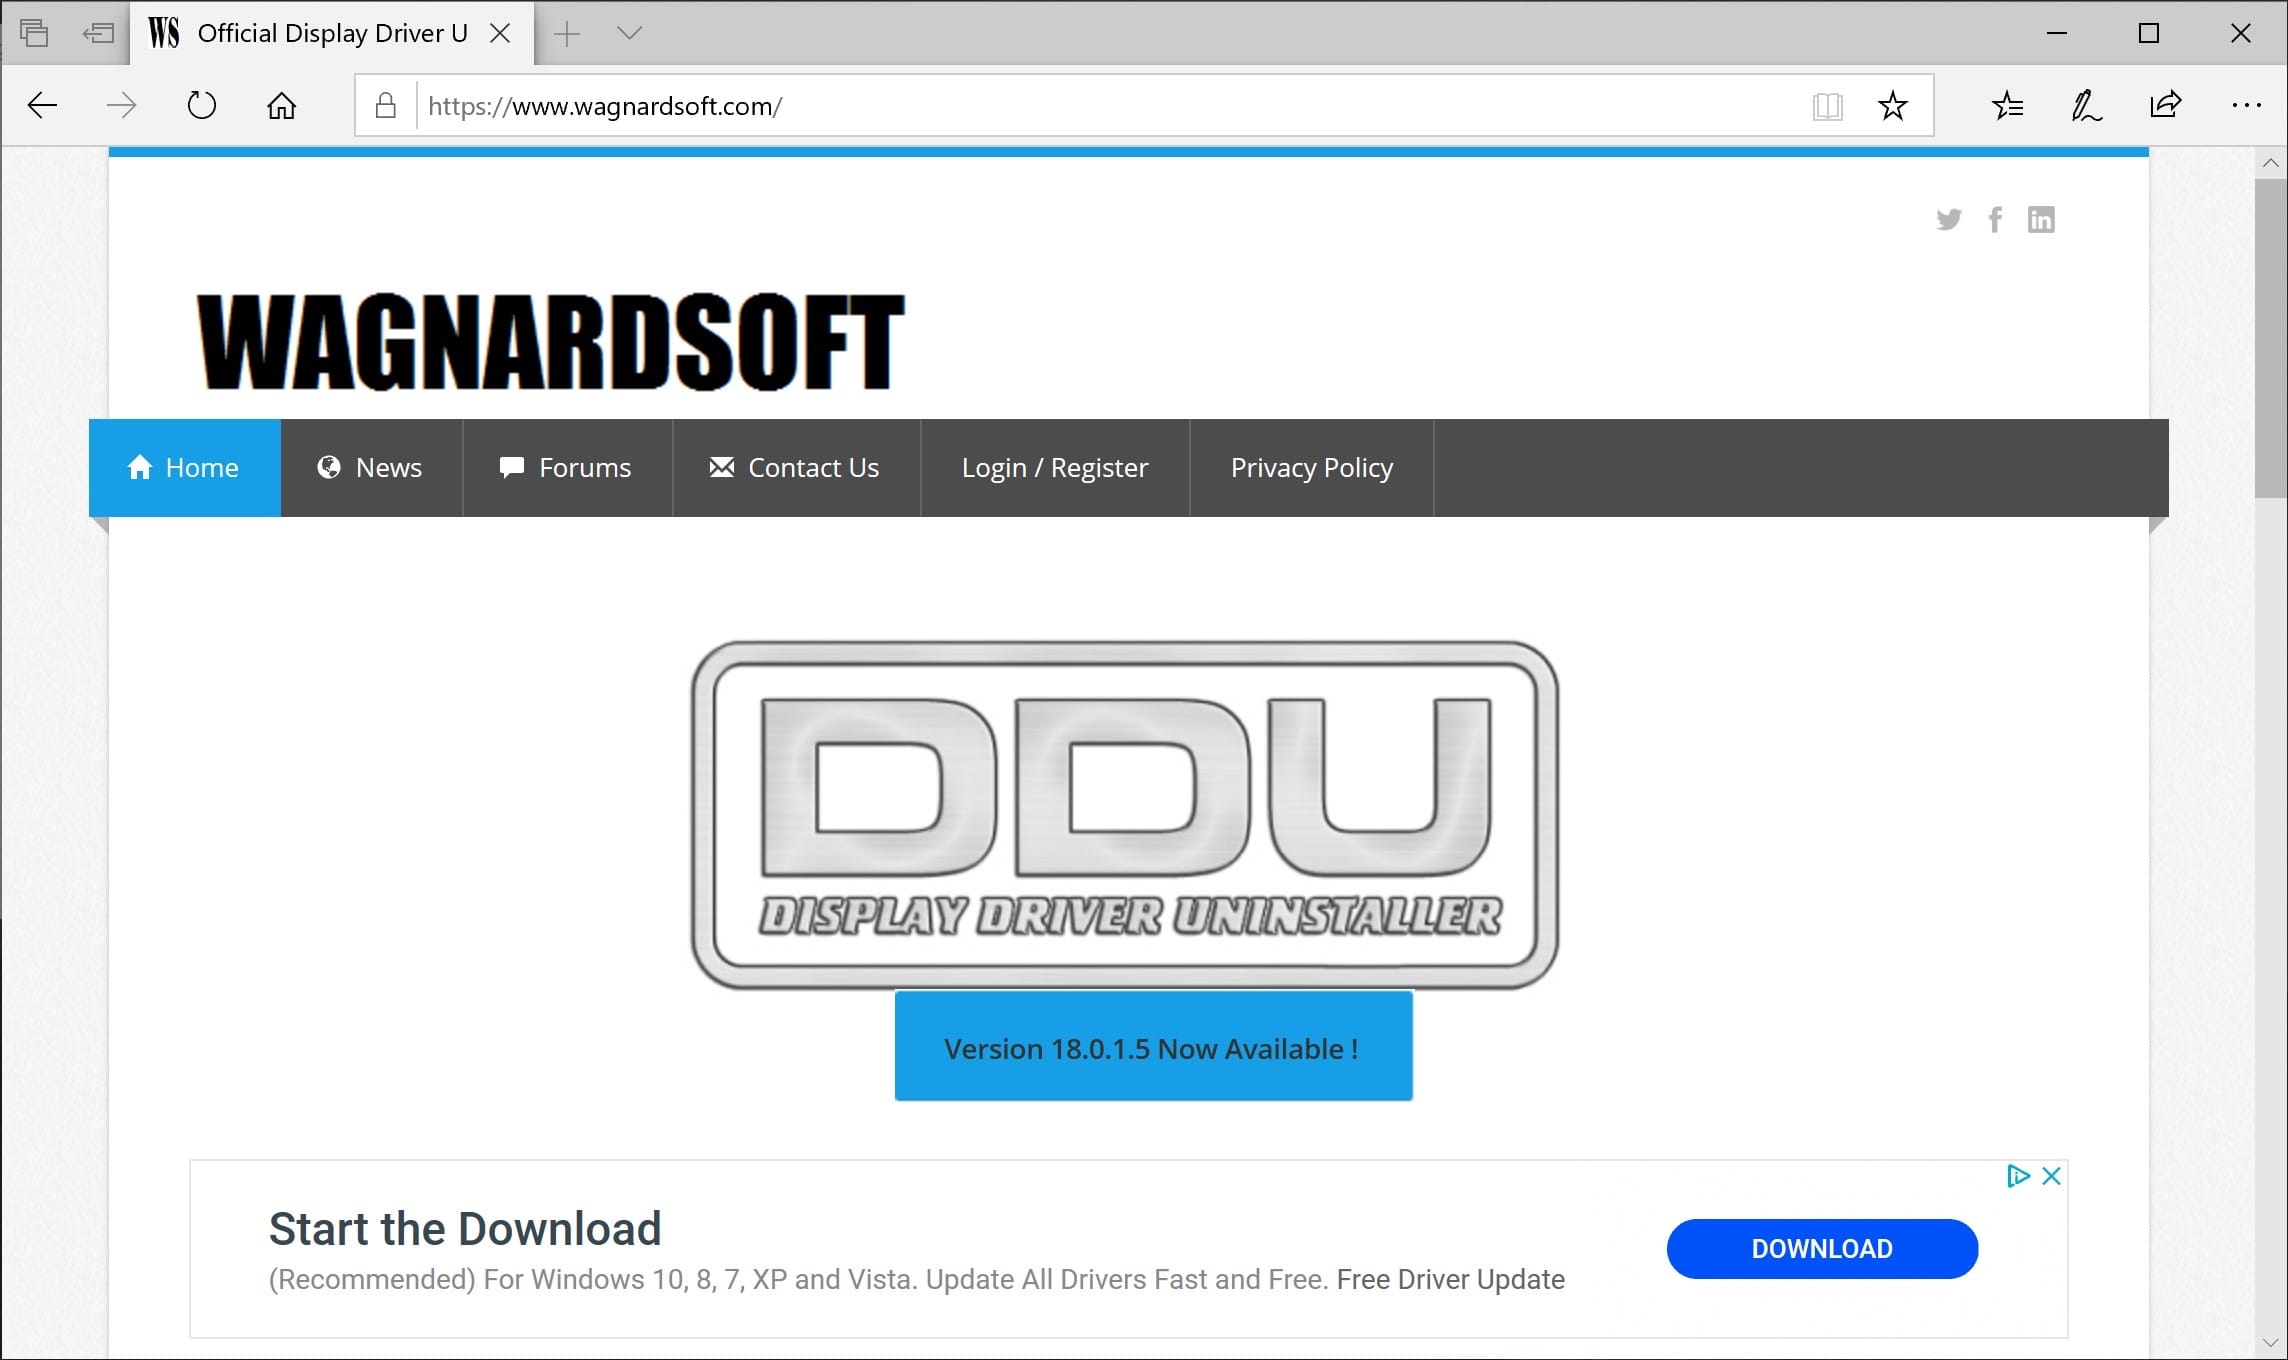 the DDU home page